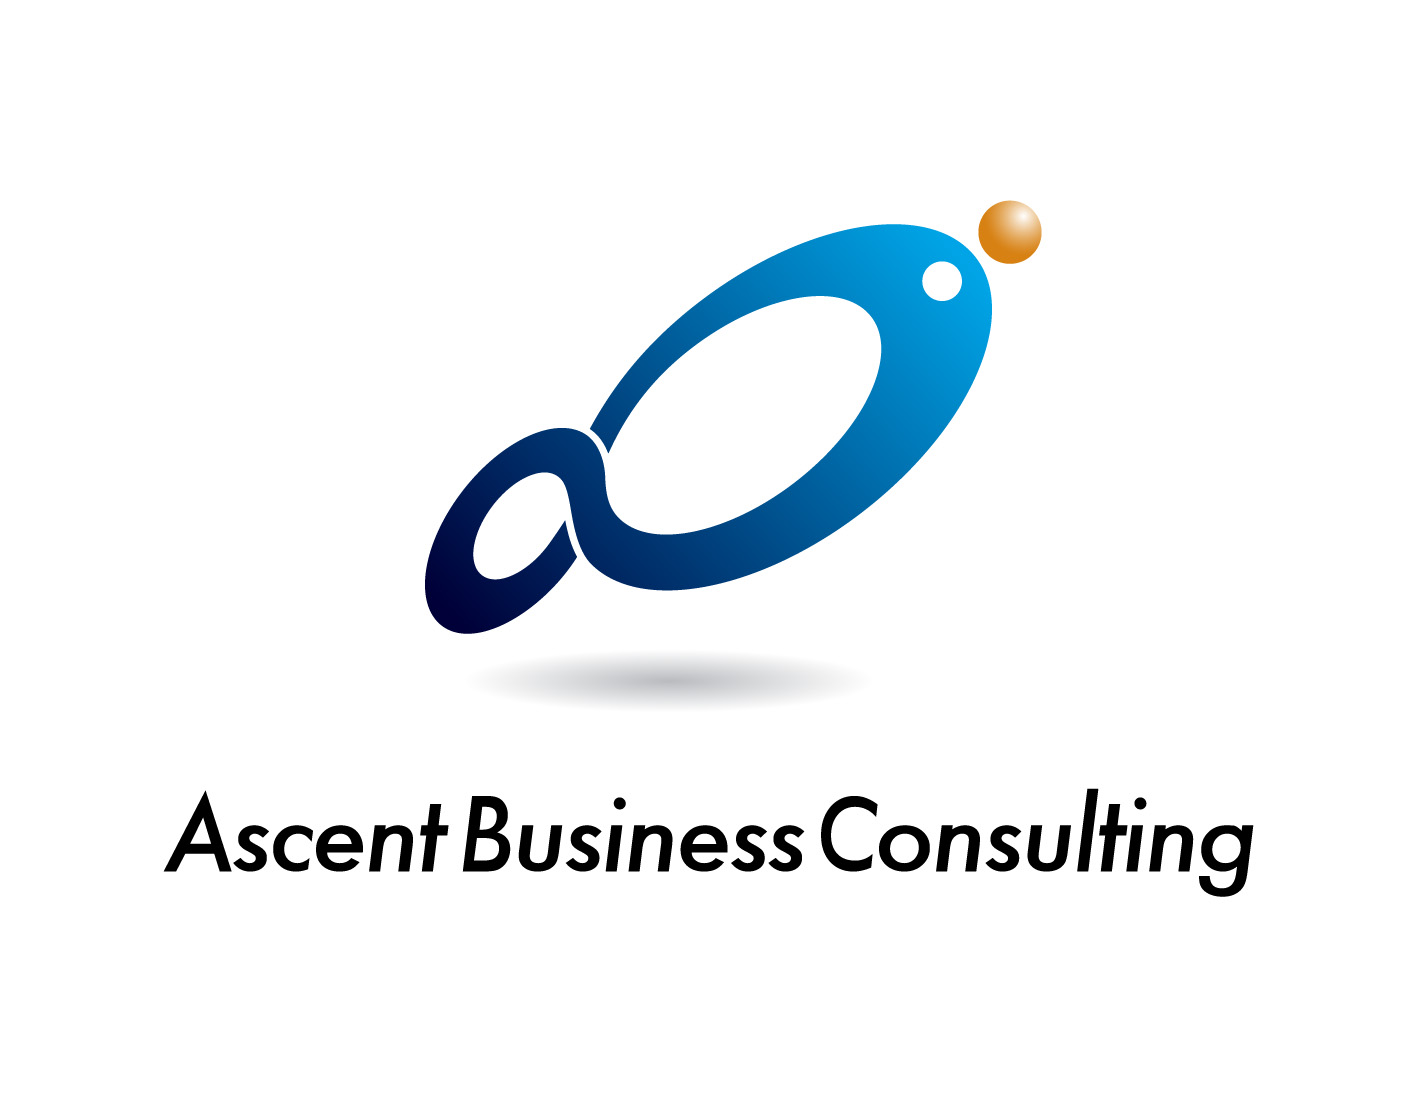 Ascent Business Consulting株式会社の会社情報 Wantedly